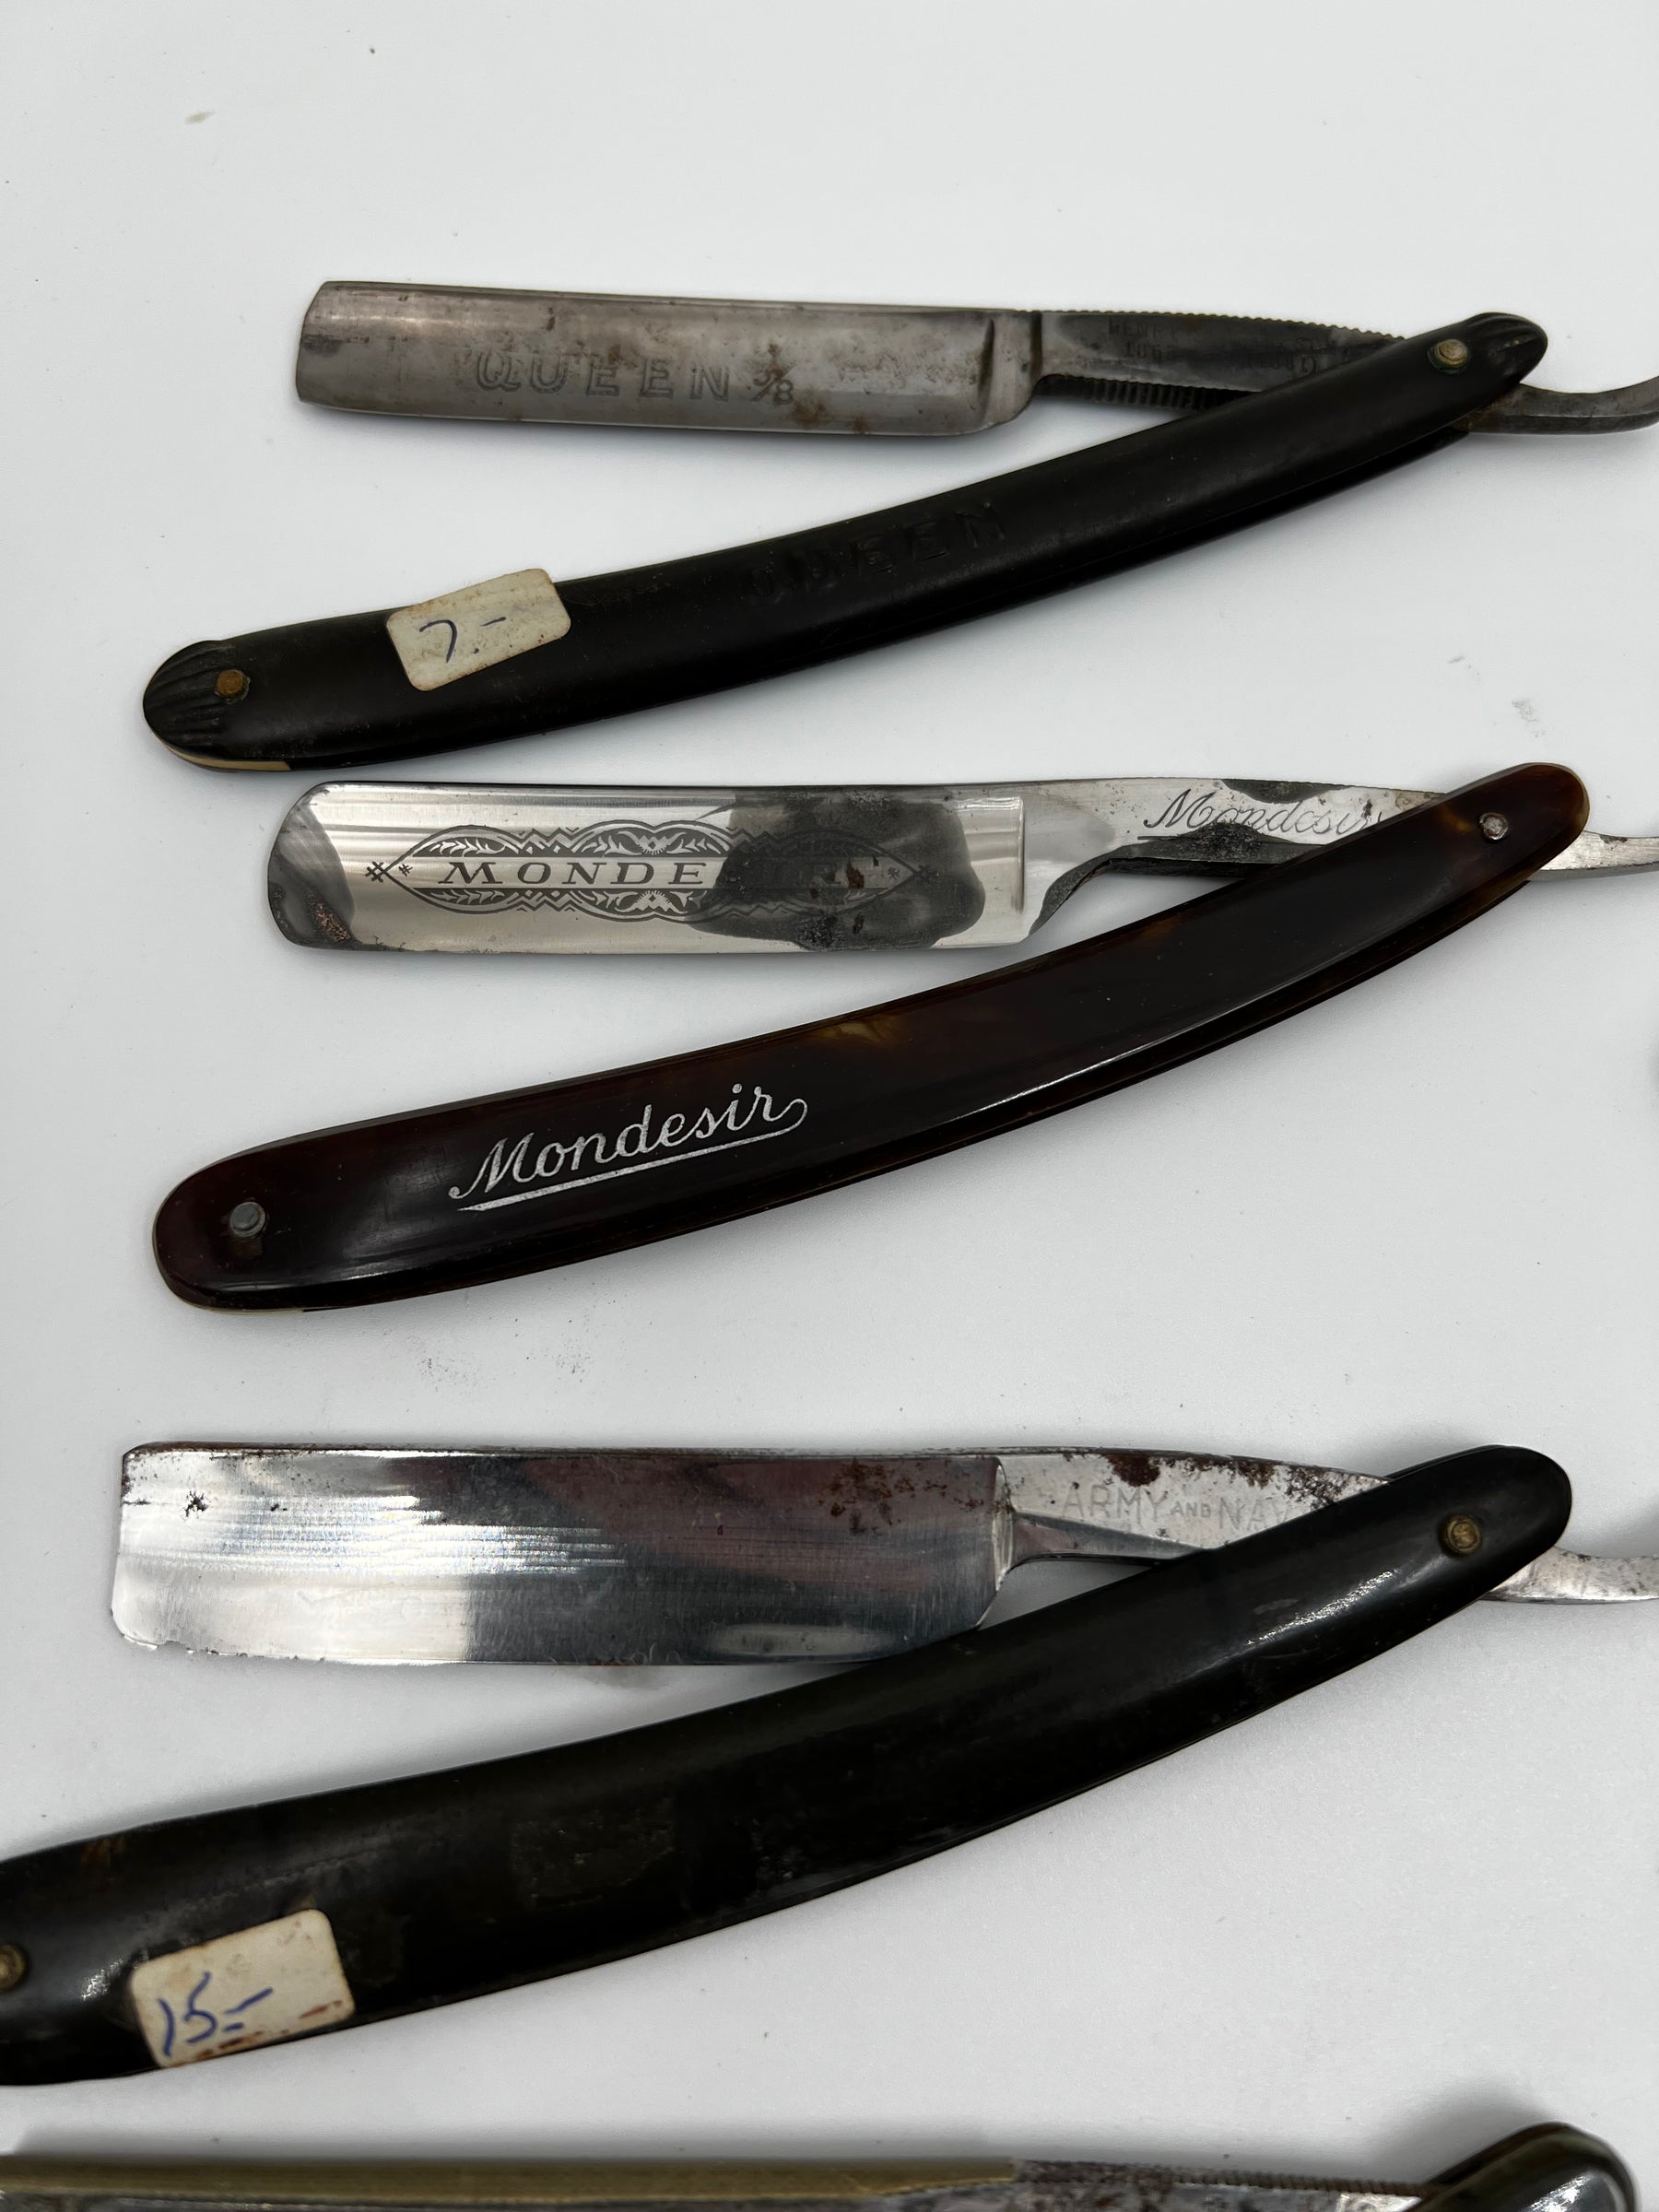 Vintage 10 Straight Razor Lot #21 - May Contain Sheffield, Solingen, Japanese & USA makers, as pictured